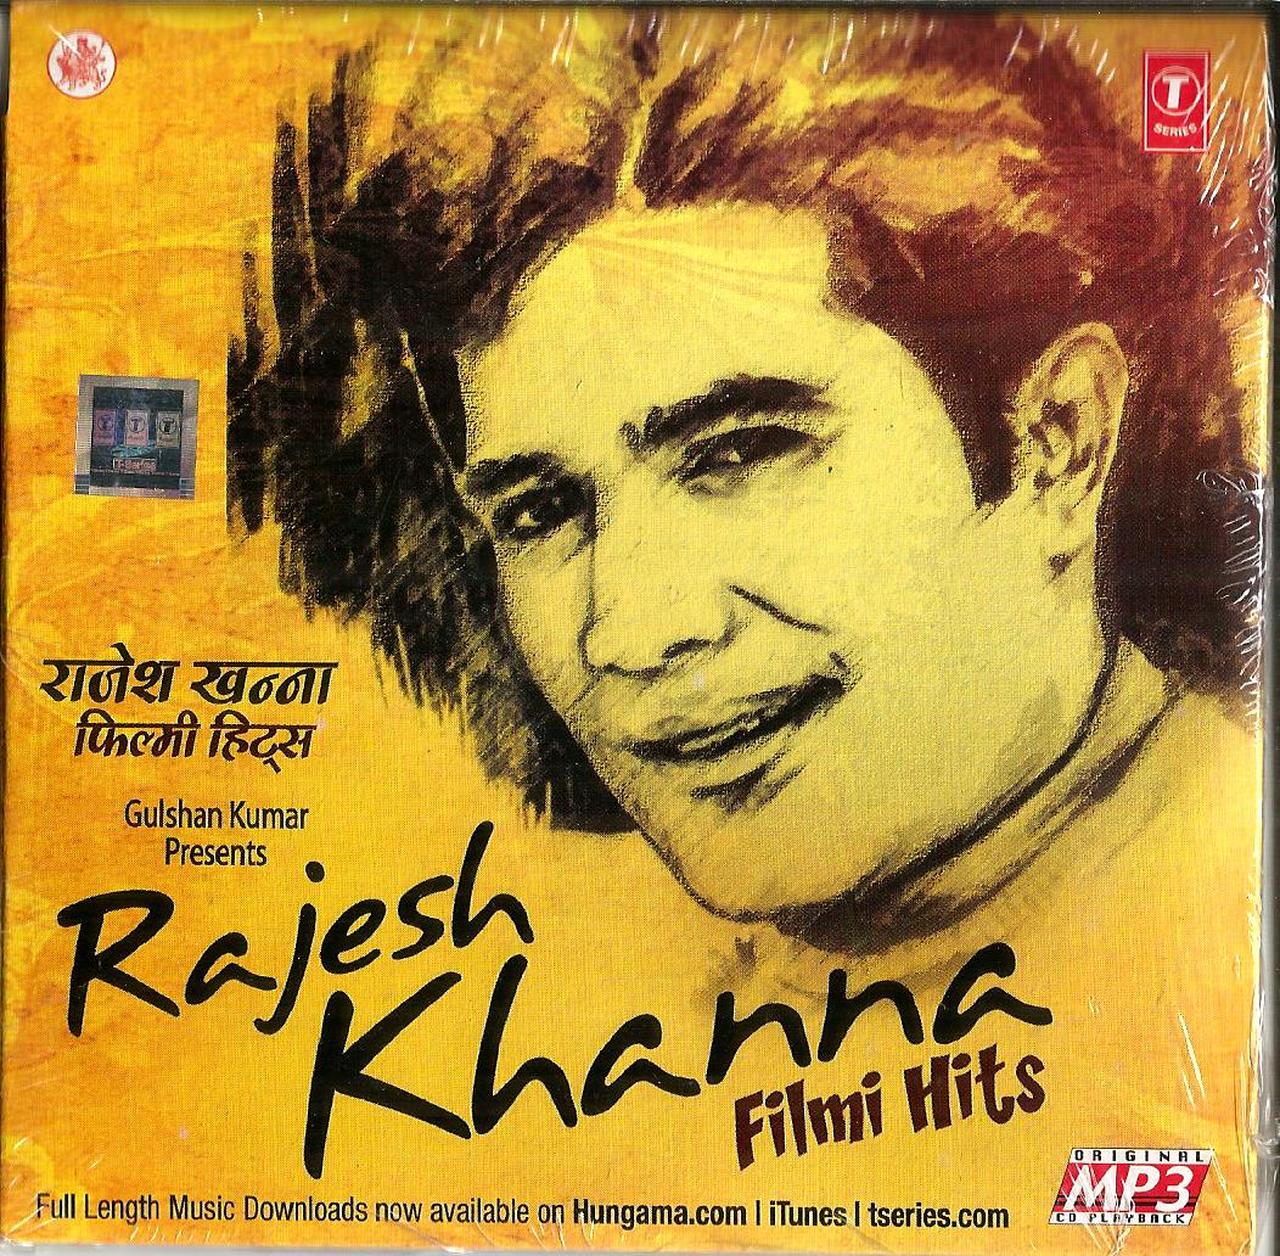 Rajesh khanna hit song mp3 download pagalworld